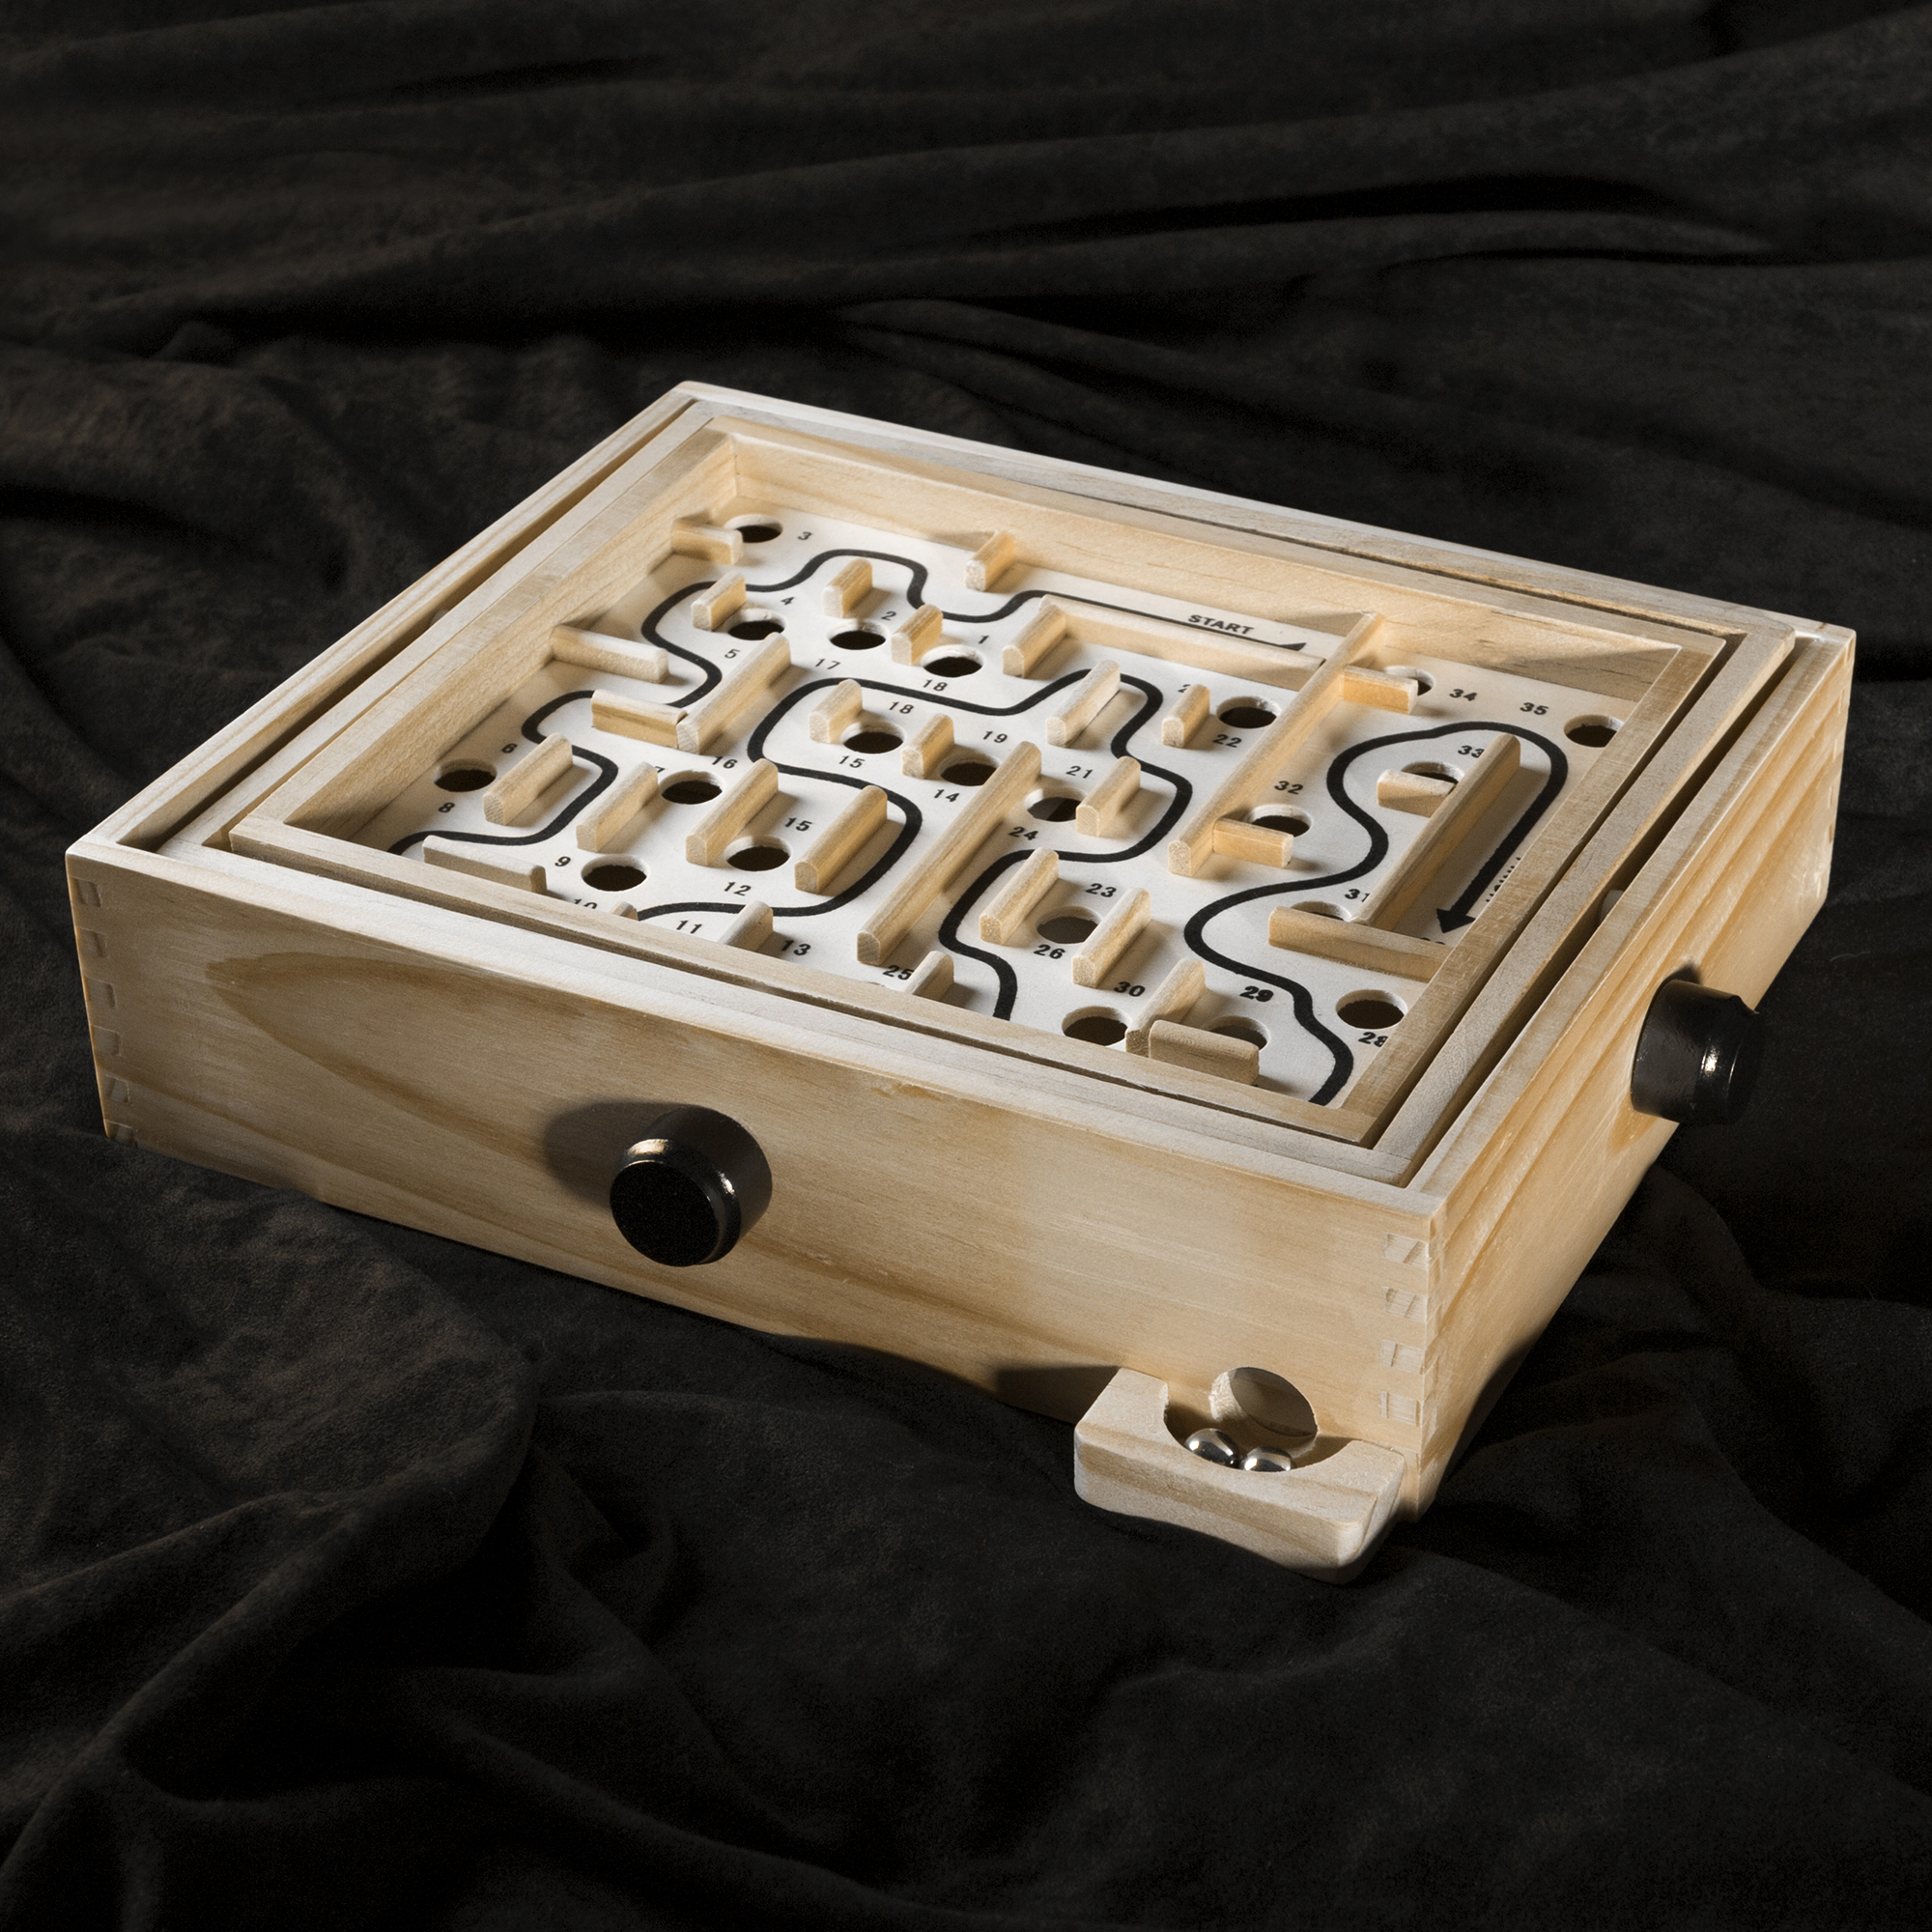 Labyrinth Wooden Maze Game with Two Steel Marbles by Hey! Play! - image 2 of 6